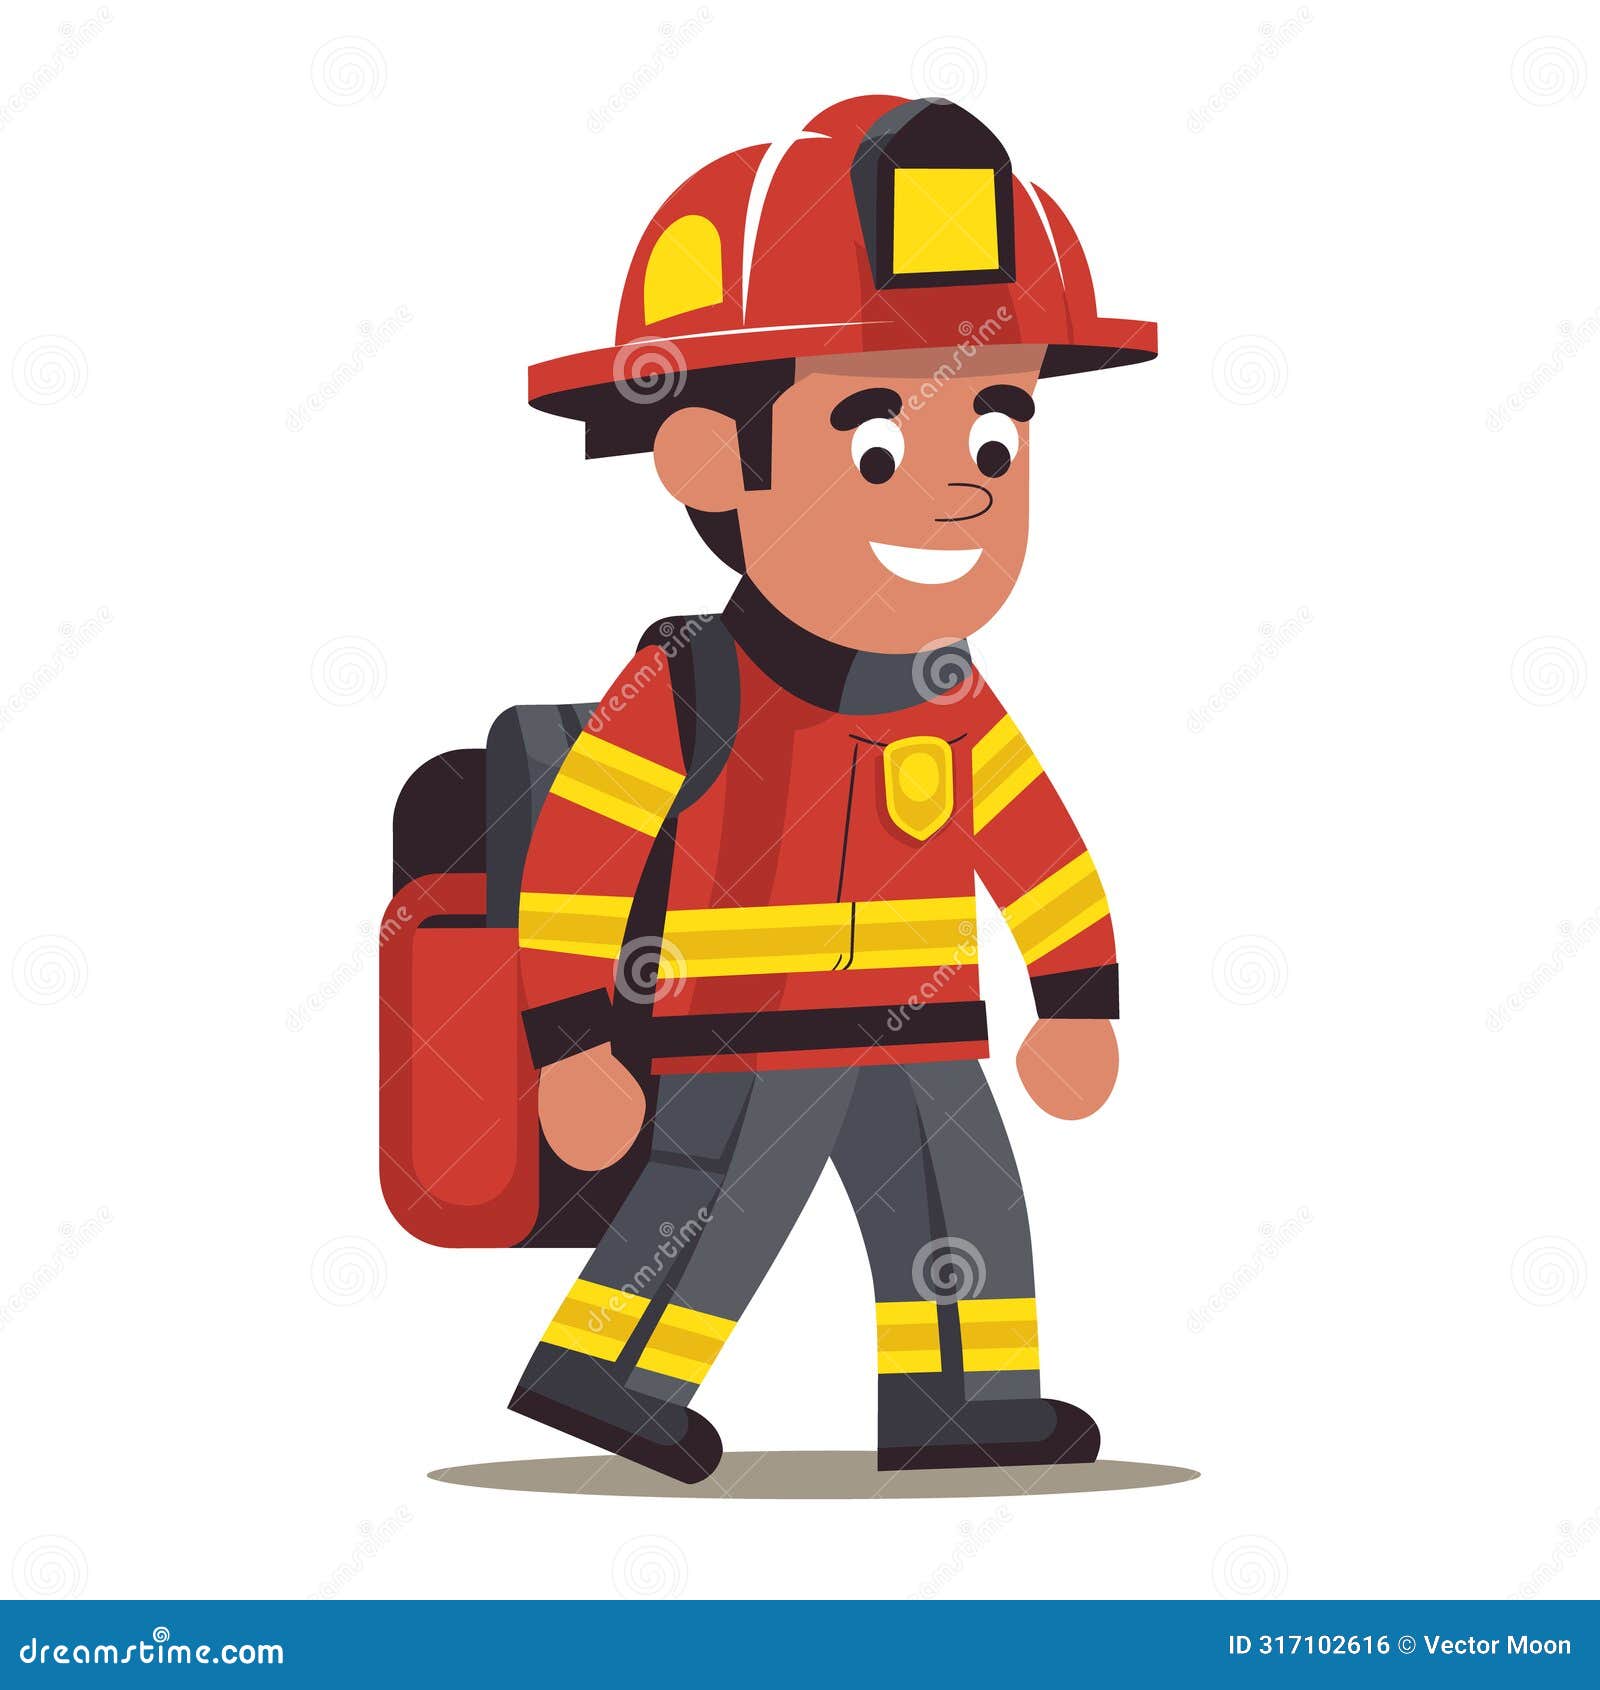 male firefighter cartoon character smiling, walking confidently wearing red helmet, protective